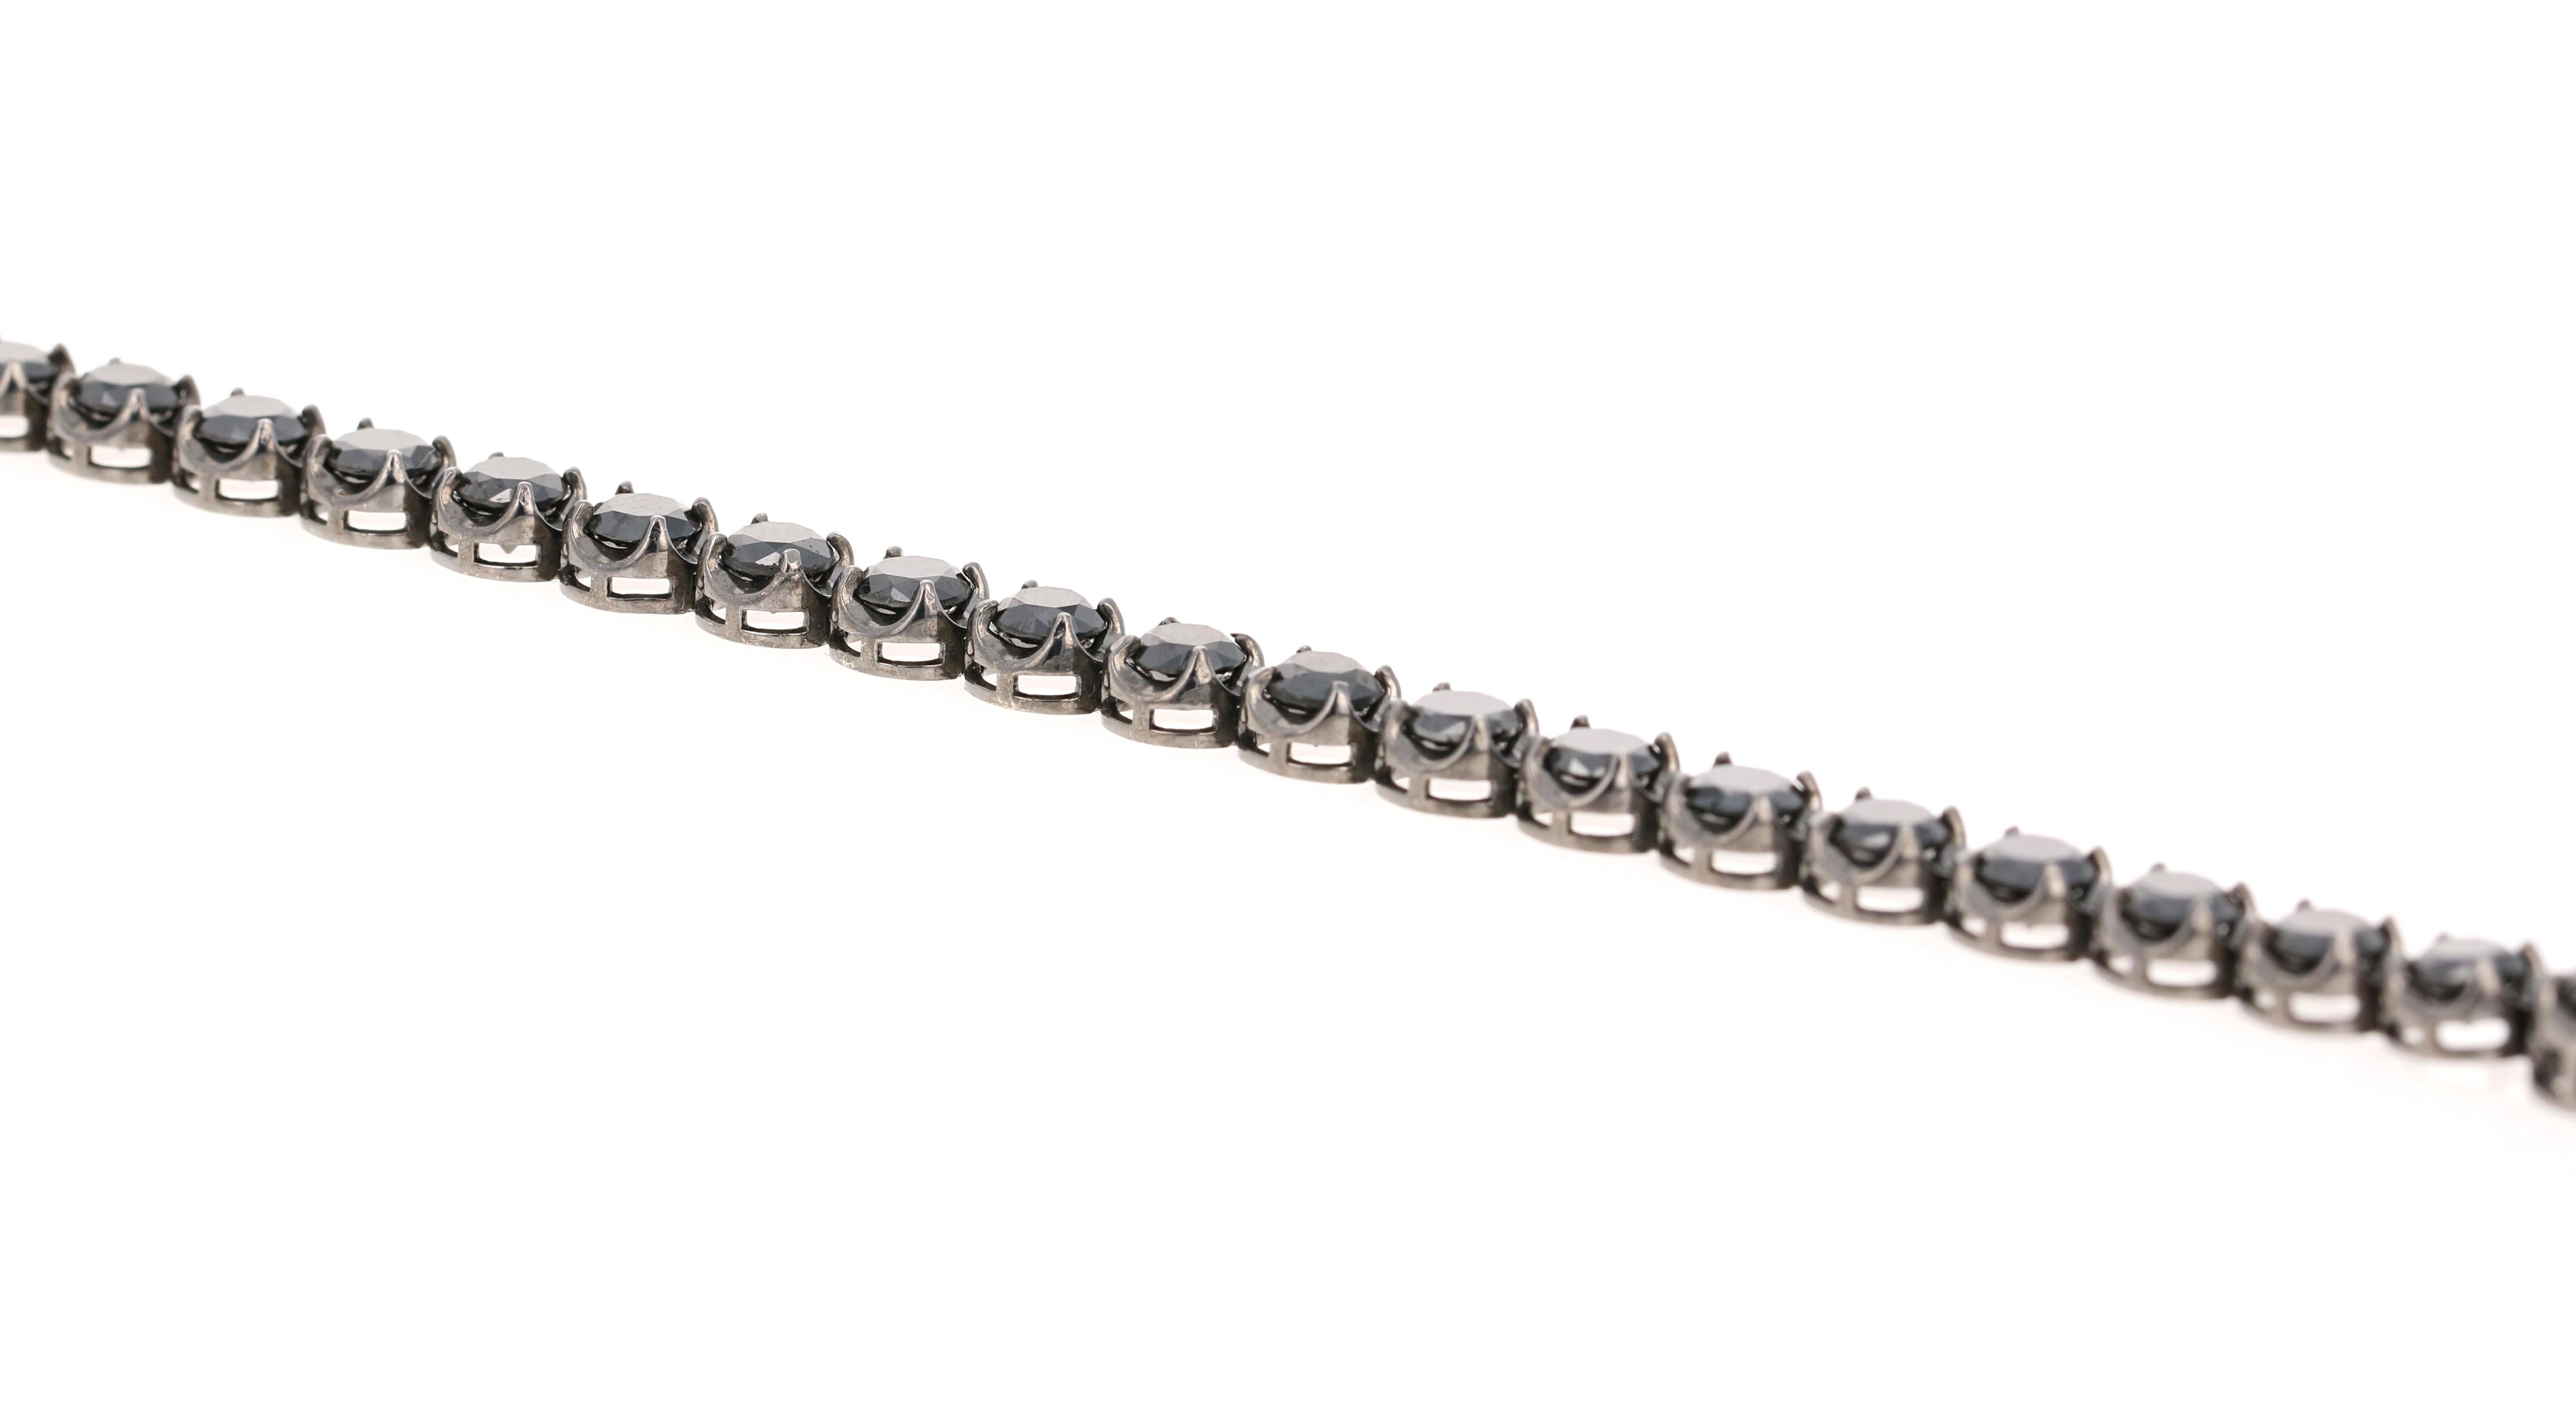 Curated in 14 Karat Gold, this piece has black rhodium to match the black diamonds.

It has 27 Round Cut Black Diamonds that weigh 12.78 Carats and is 7.5 inches long with an appproximate weight of 14.0 grams.

